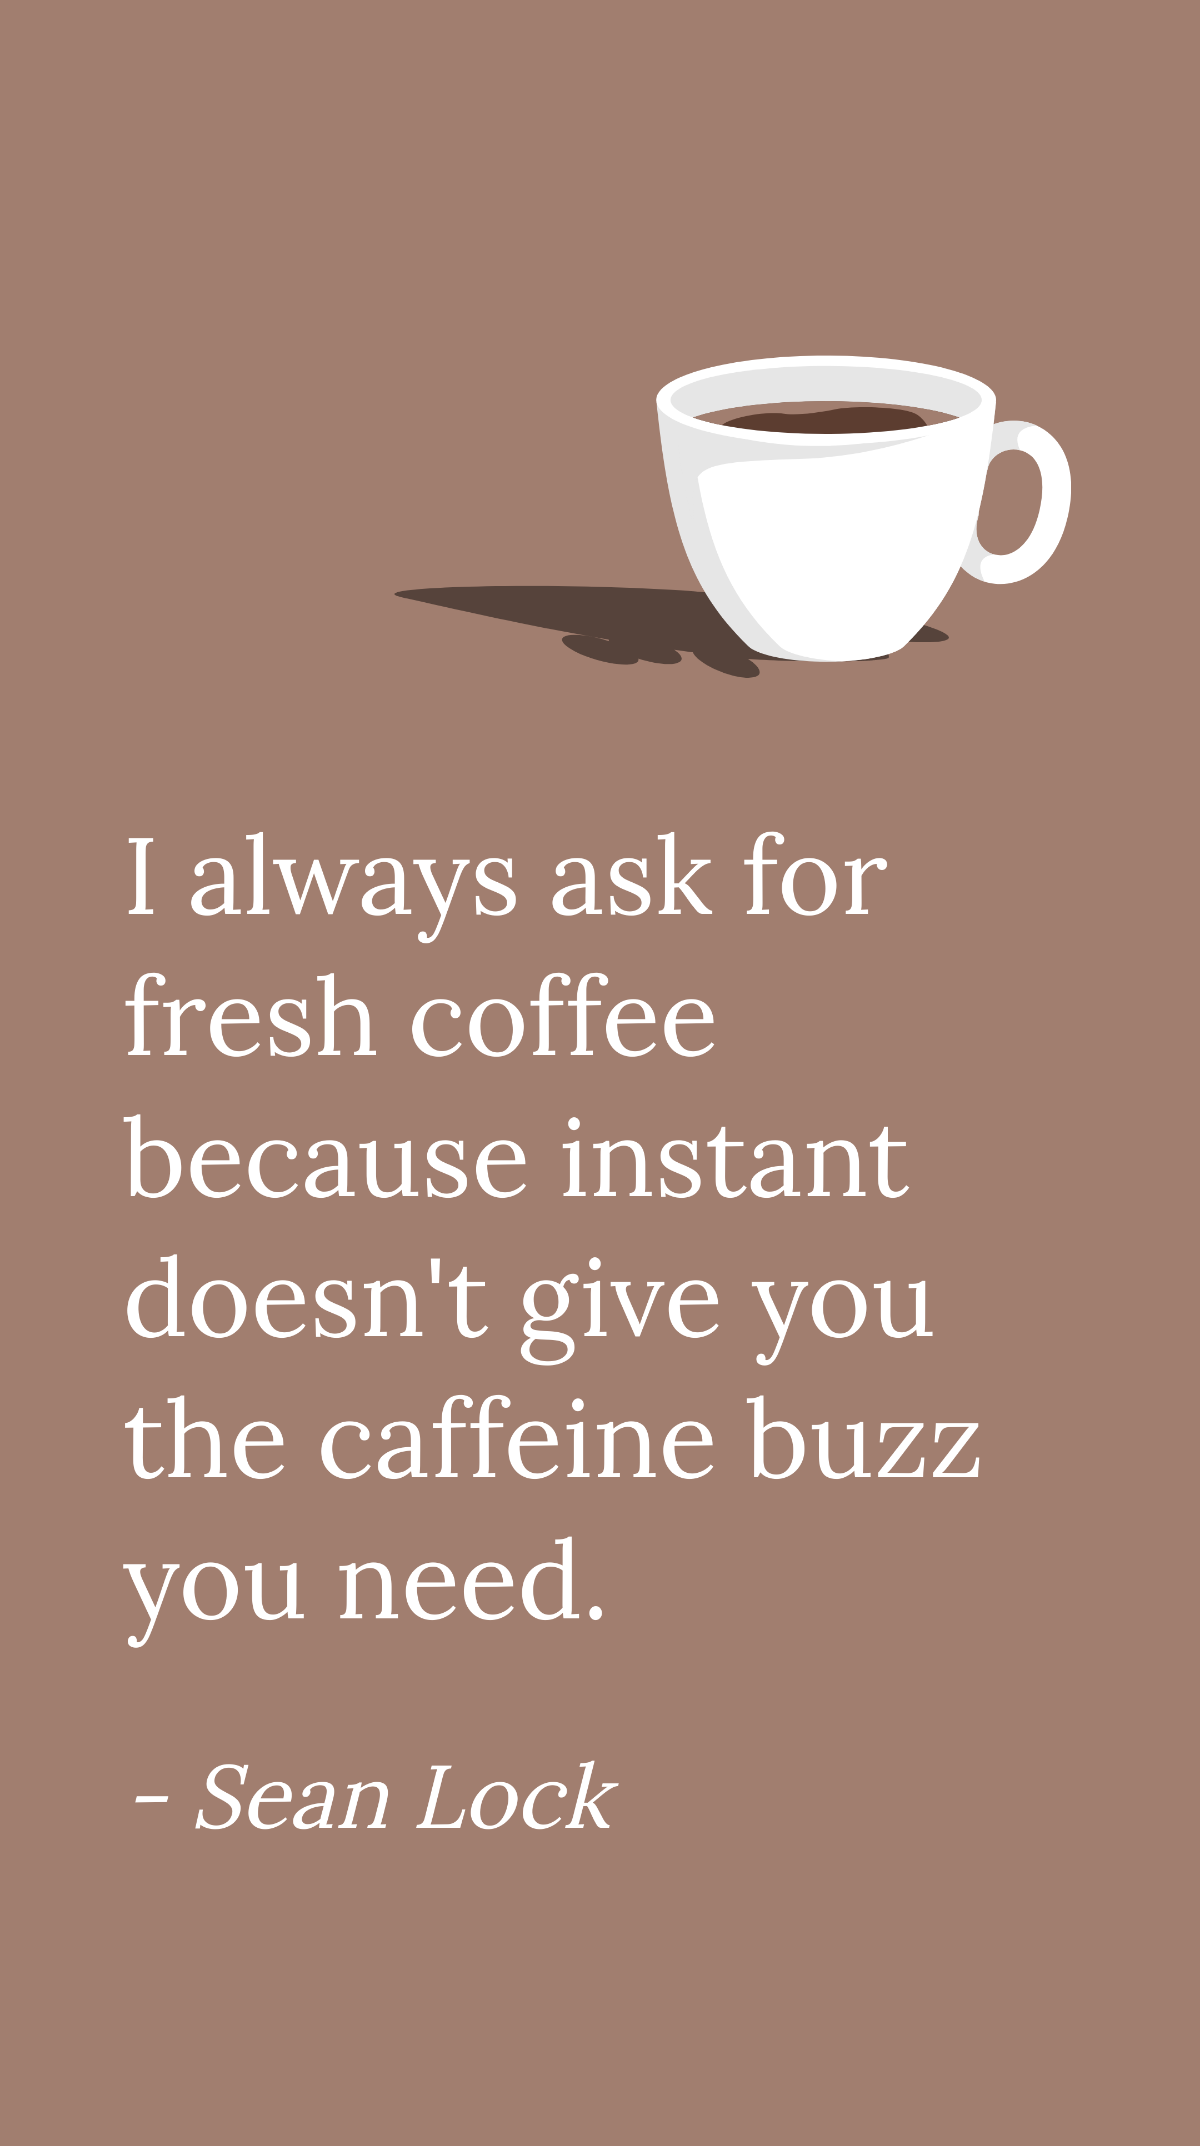 Sean Lock - I always ask for fresh coffee because instant doesn't give you the caffeine buzz you need.